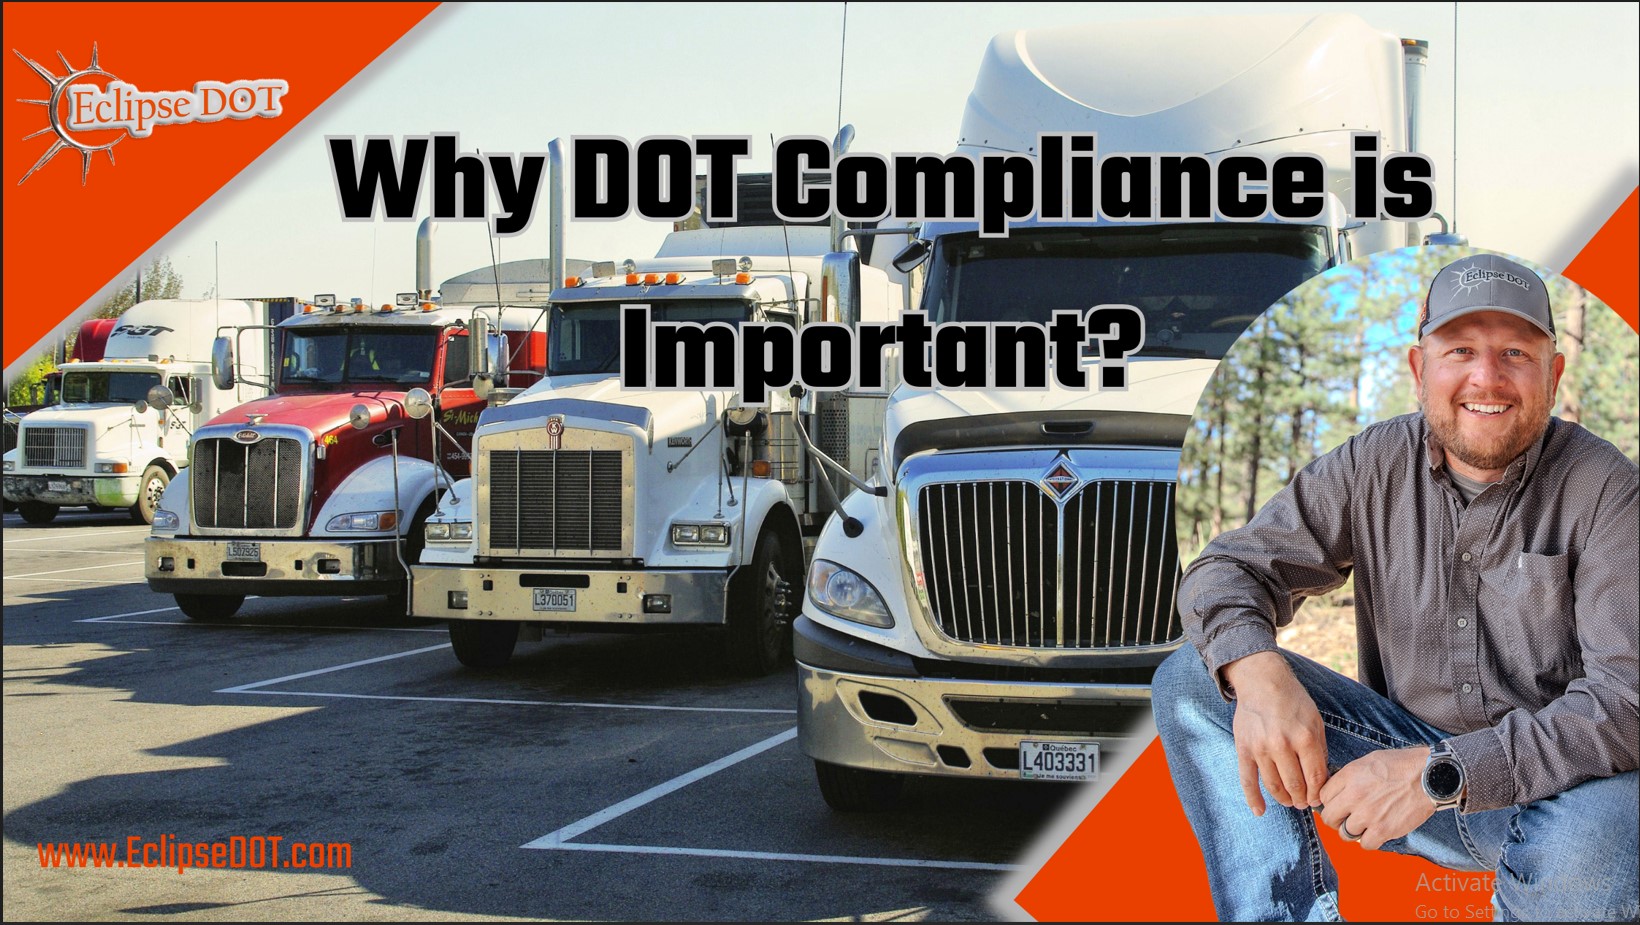 Image showing a truck on a road with a DOT compliance logo in the background.